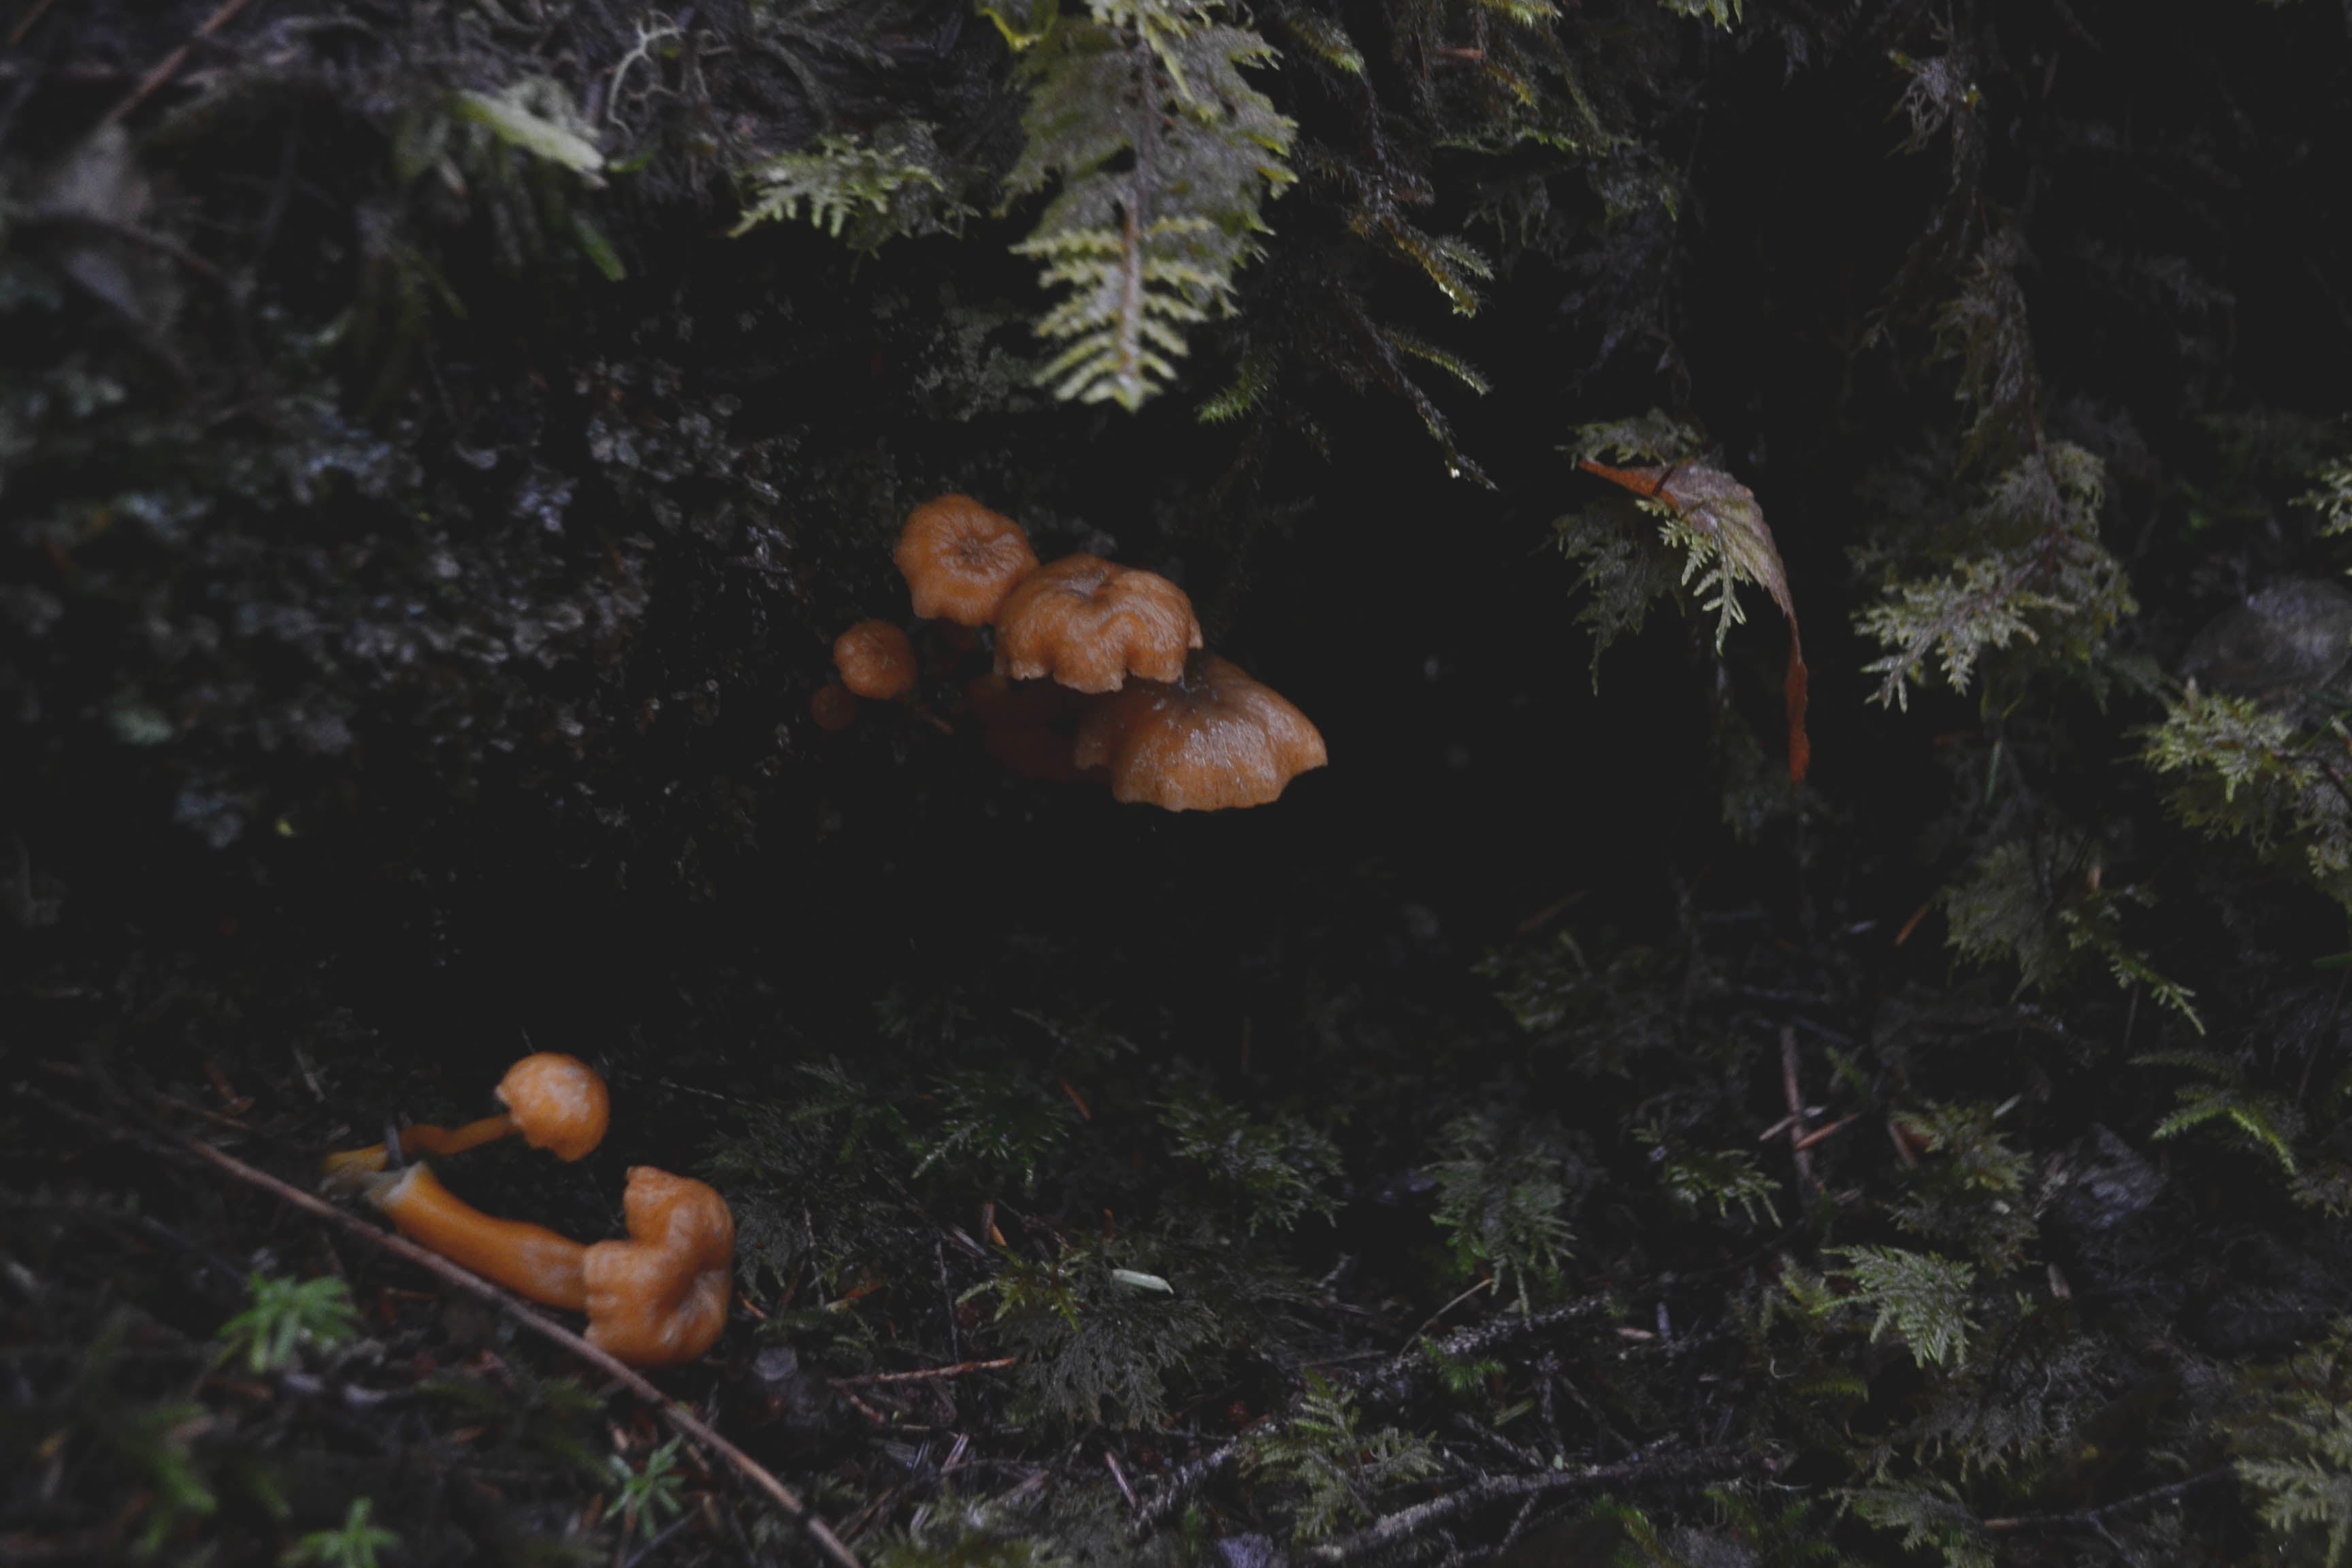 Yellowfoot mushrooms peek out from the underside of a wet, mossy log in the Tongass rainforest